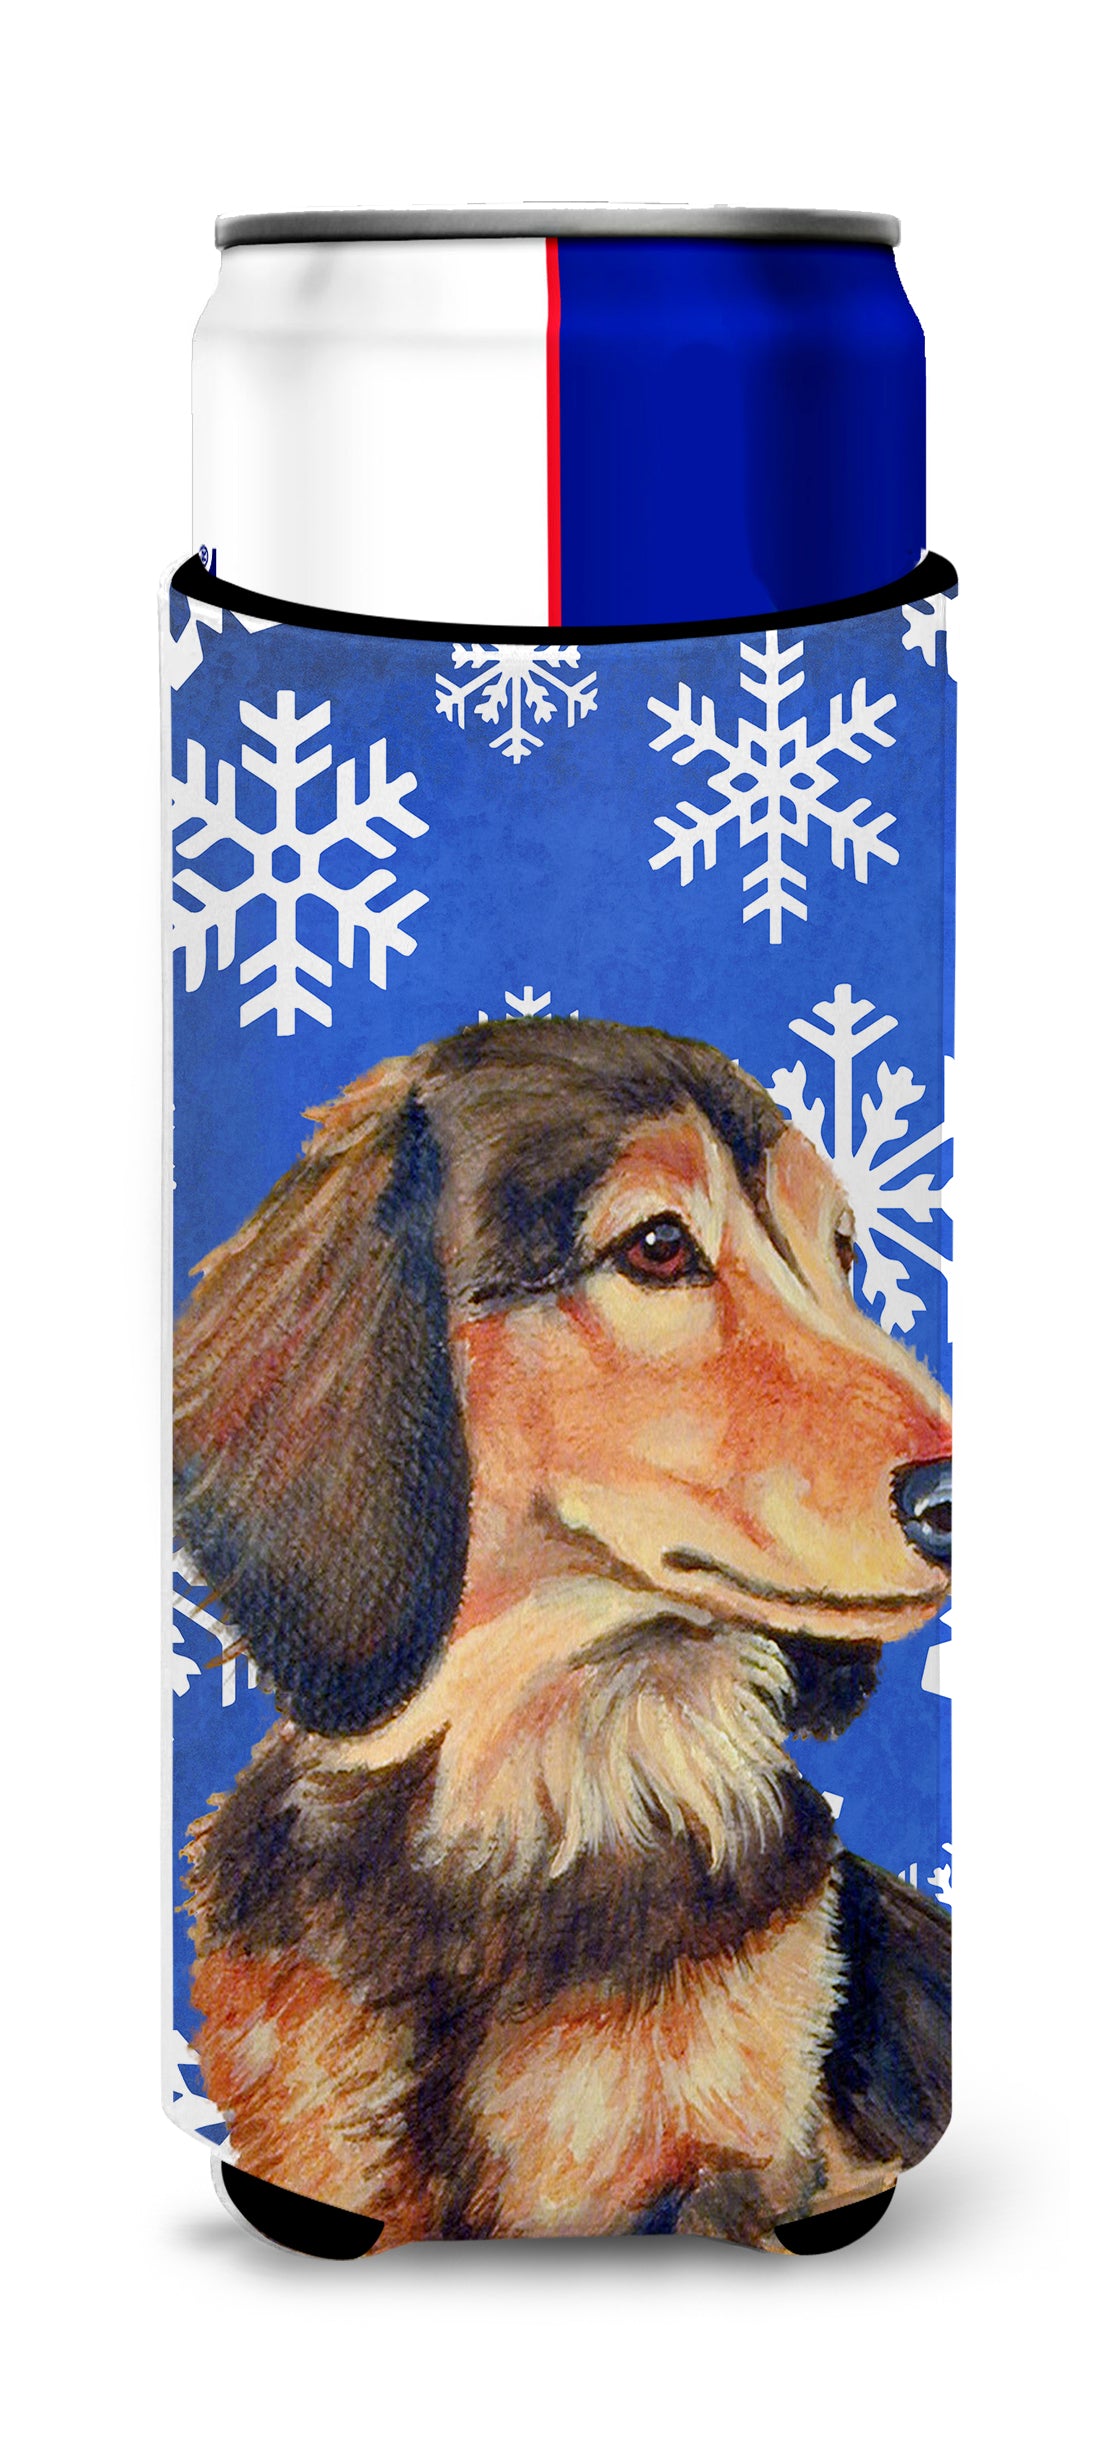 Dachshund Winter Snowflakes Holiday Ultra Beverage Insulators for slim cans LH9301MUK.